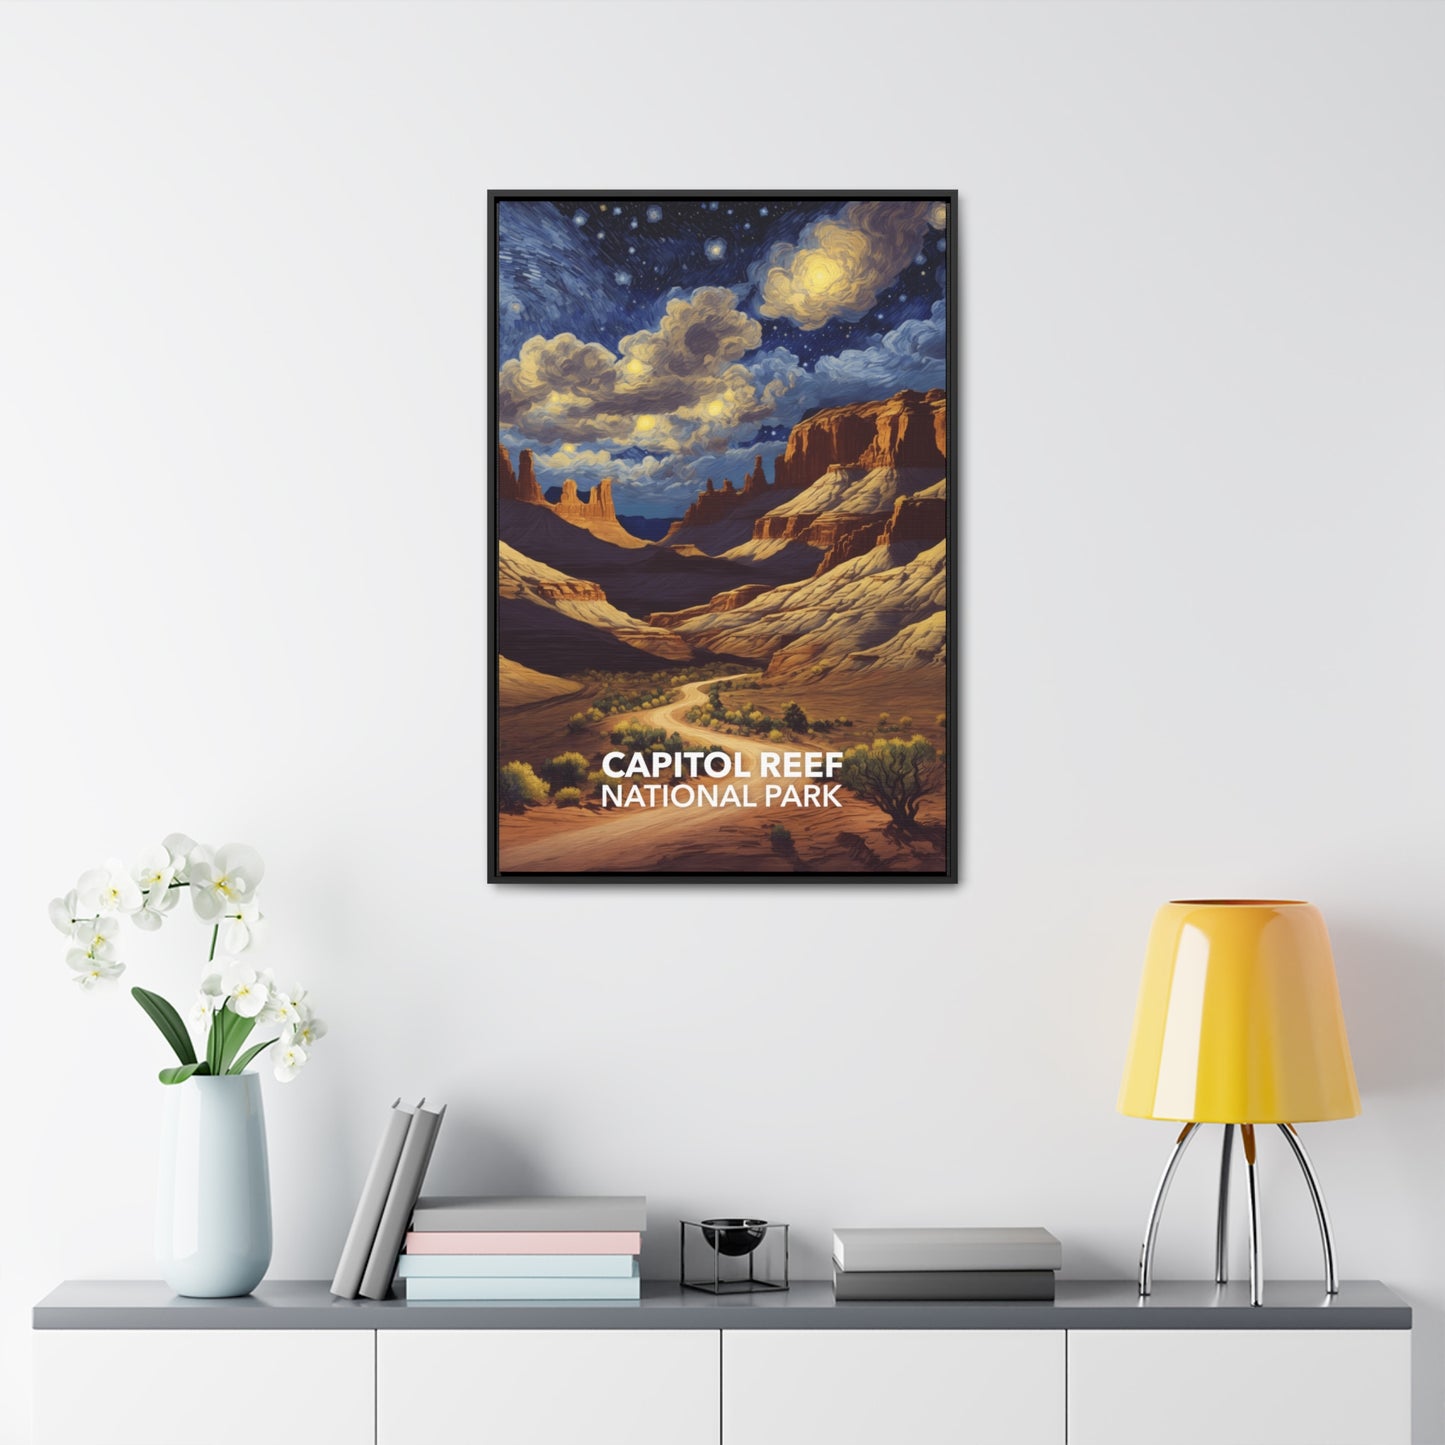 Capitol Reef National Park Framed Canvas - The Starry Night